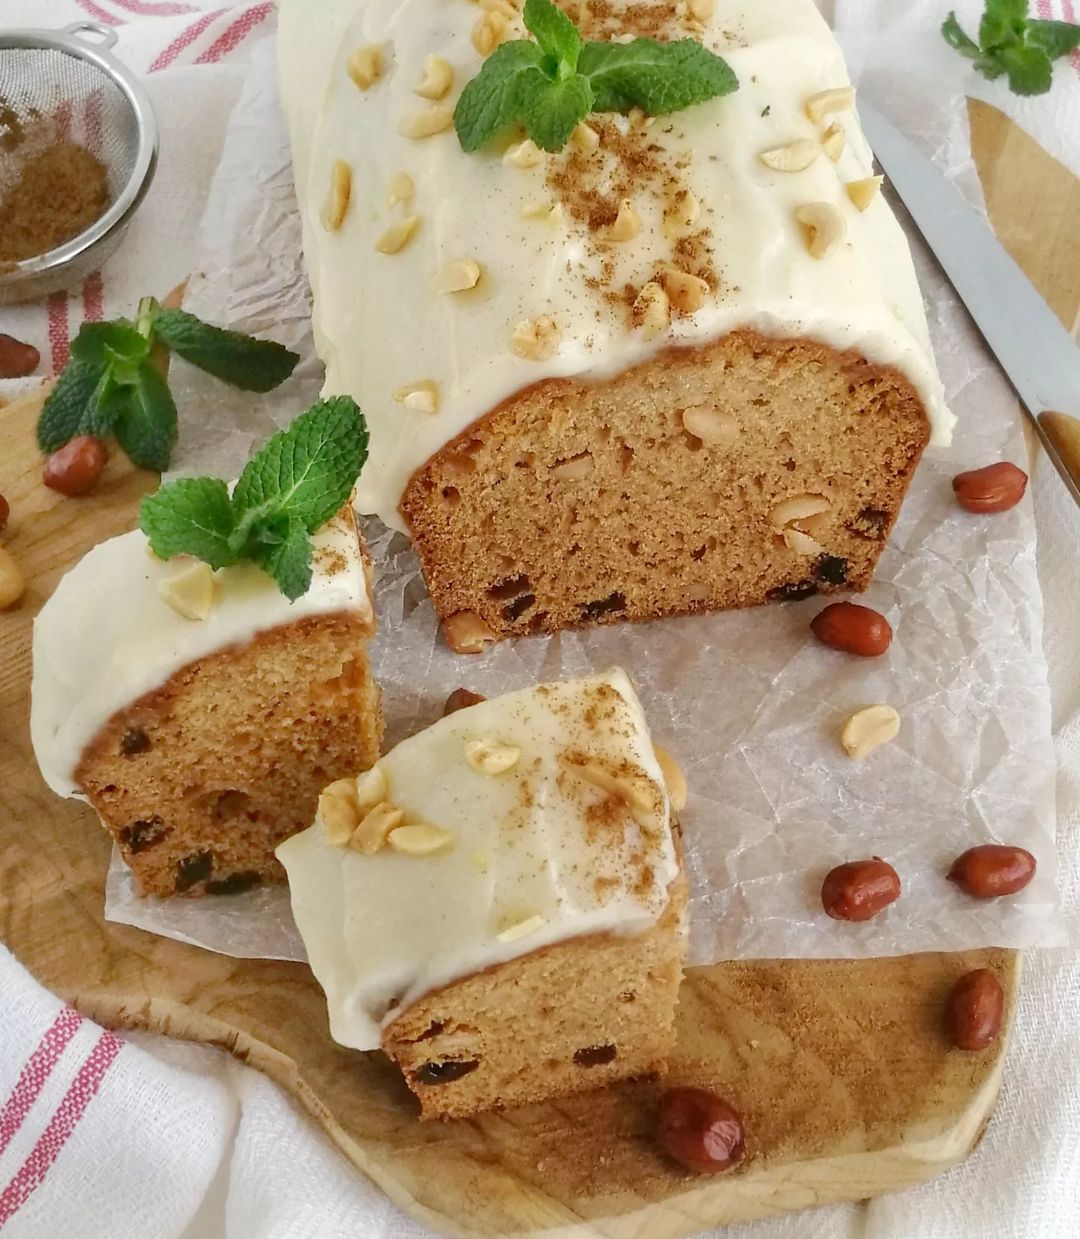 Honey gingerbread cake with raisins and peanuts